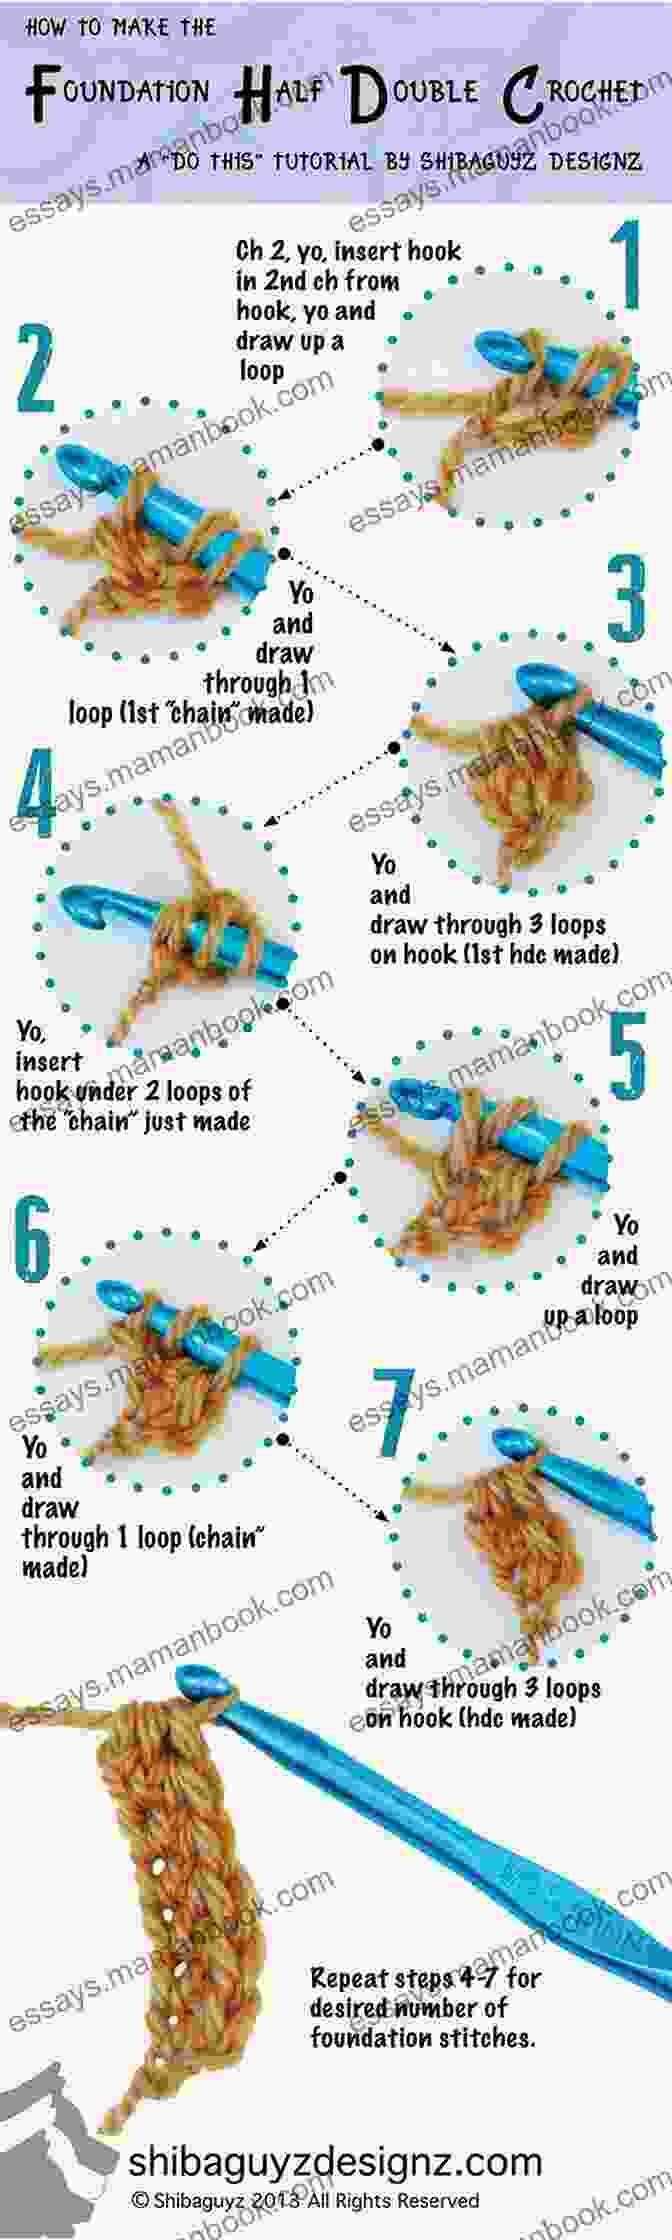 Diagram Of A Half Double Crochet Crochet Every Way Stitch Dictionary: 125 Essential Stitches To Crochet In Three Ways